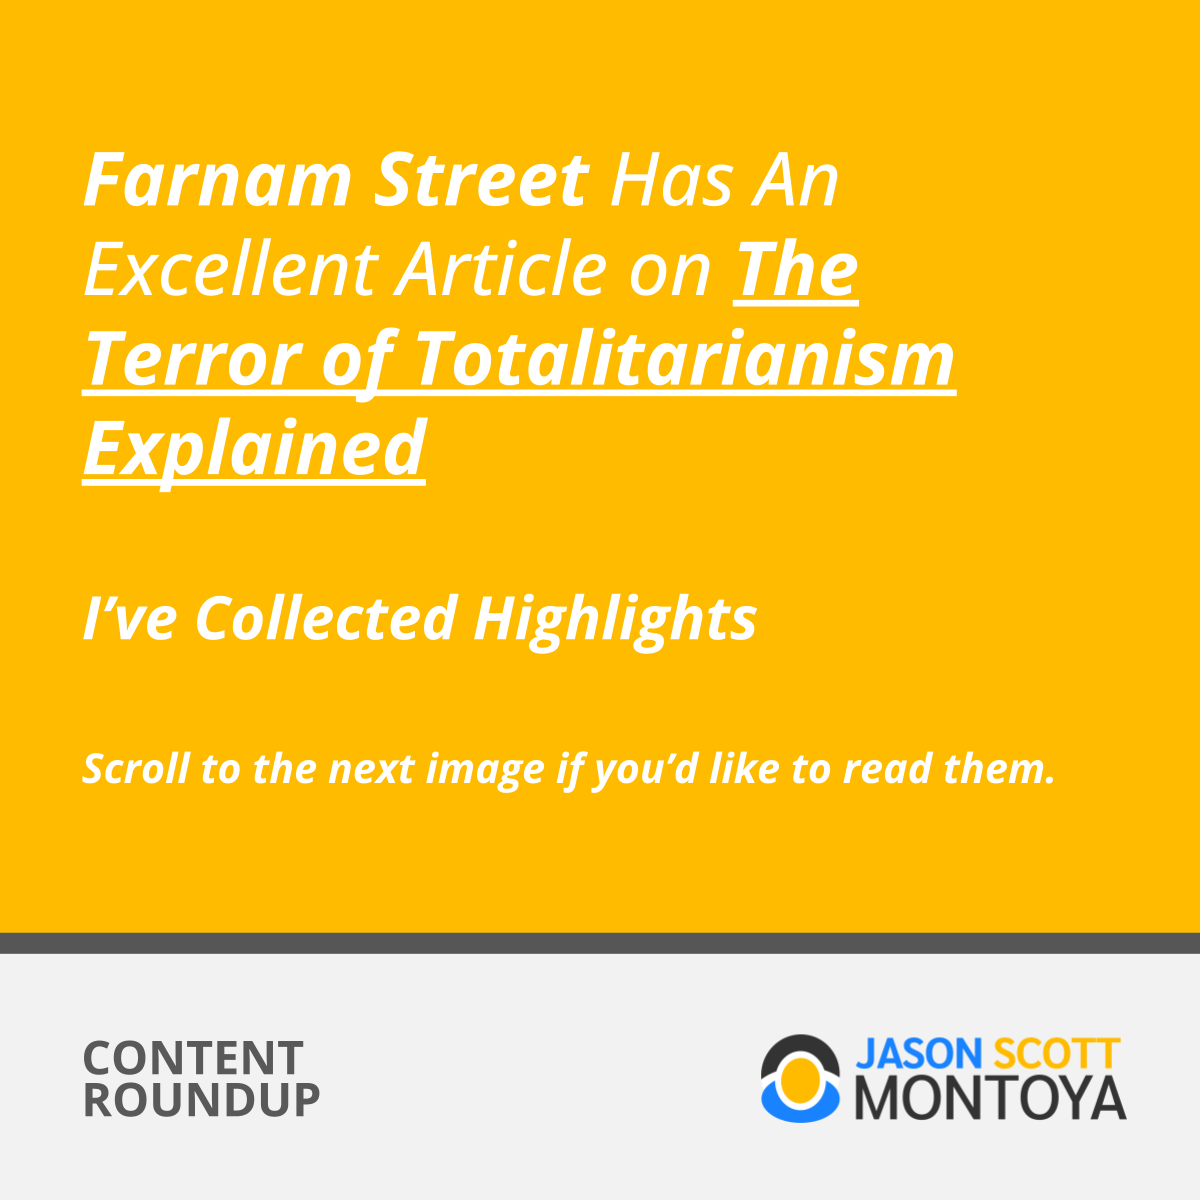 Farnam Street Has An Excellent Article on The Terror of Totalitarianism Explained  I’ve Collected Highlights  Scroll to the next image if you’d like to read them. Scroll away if you don’t.